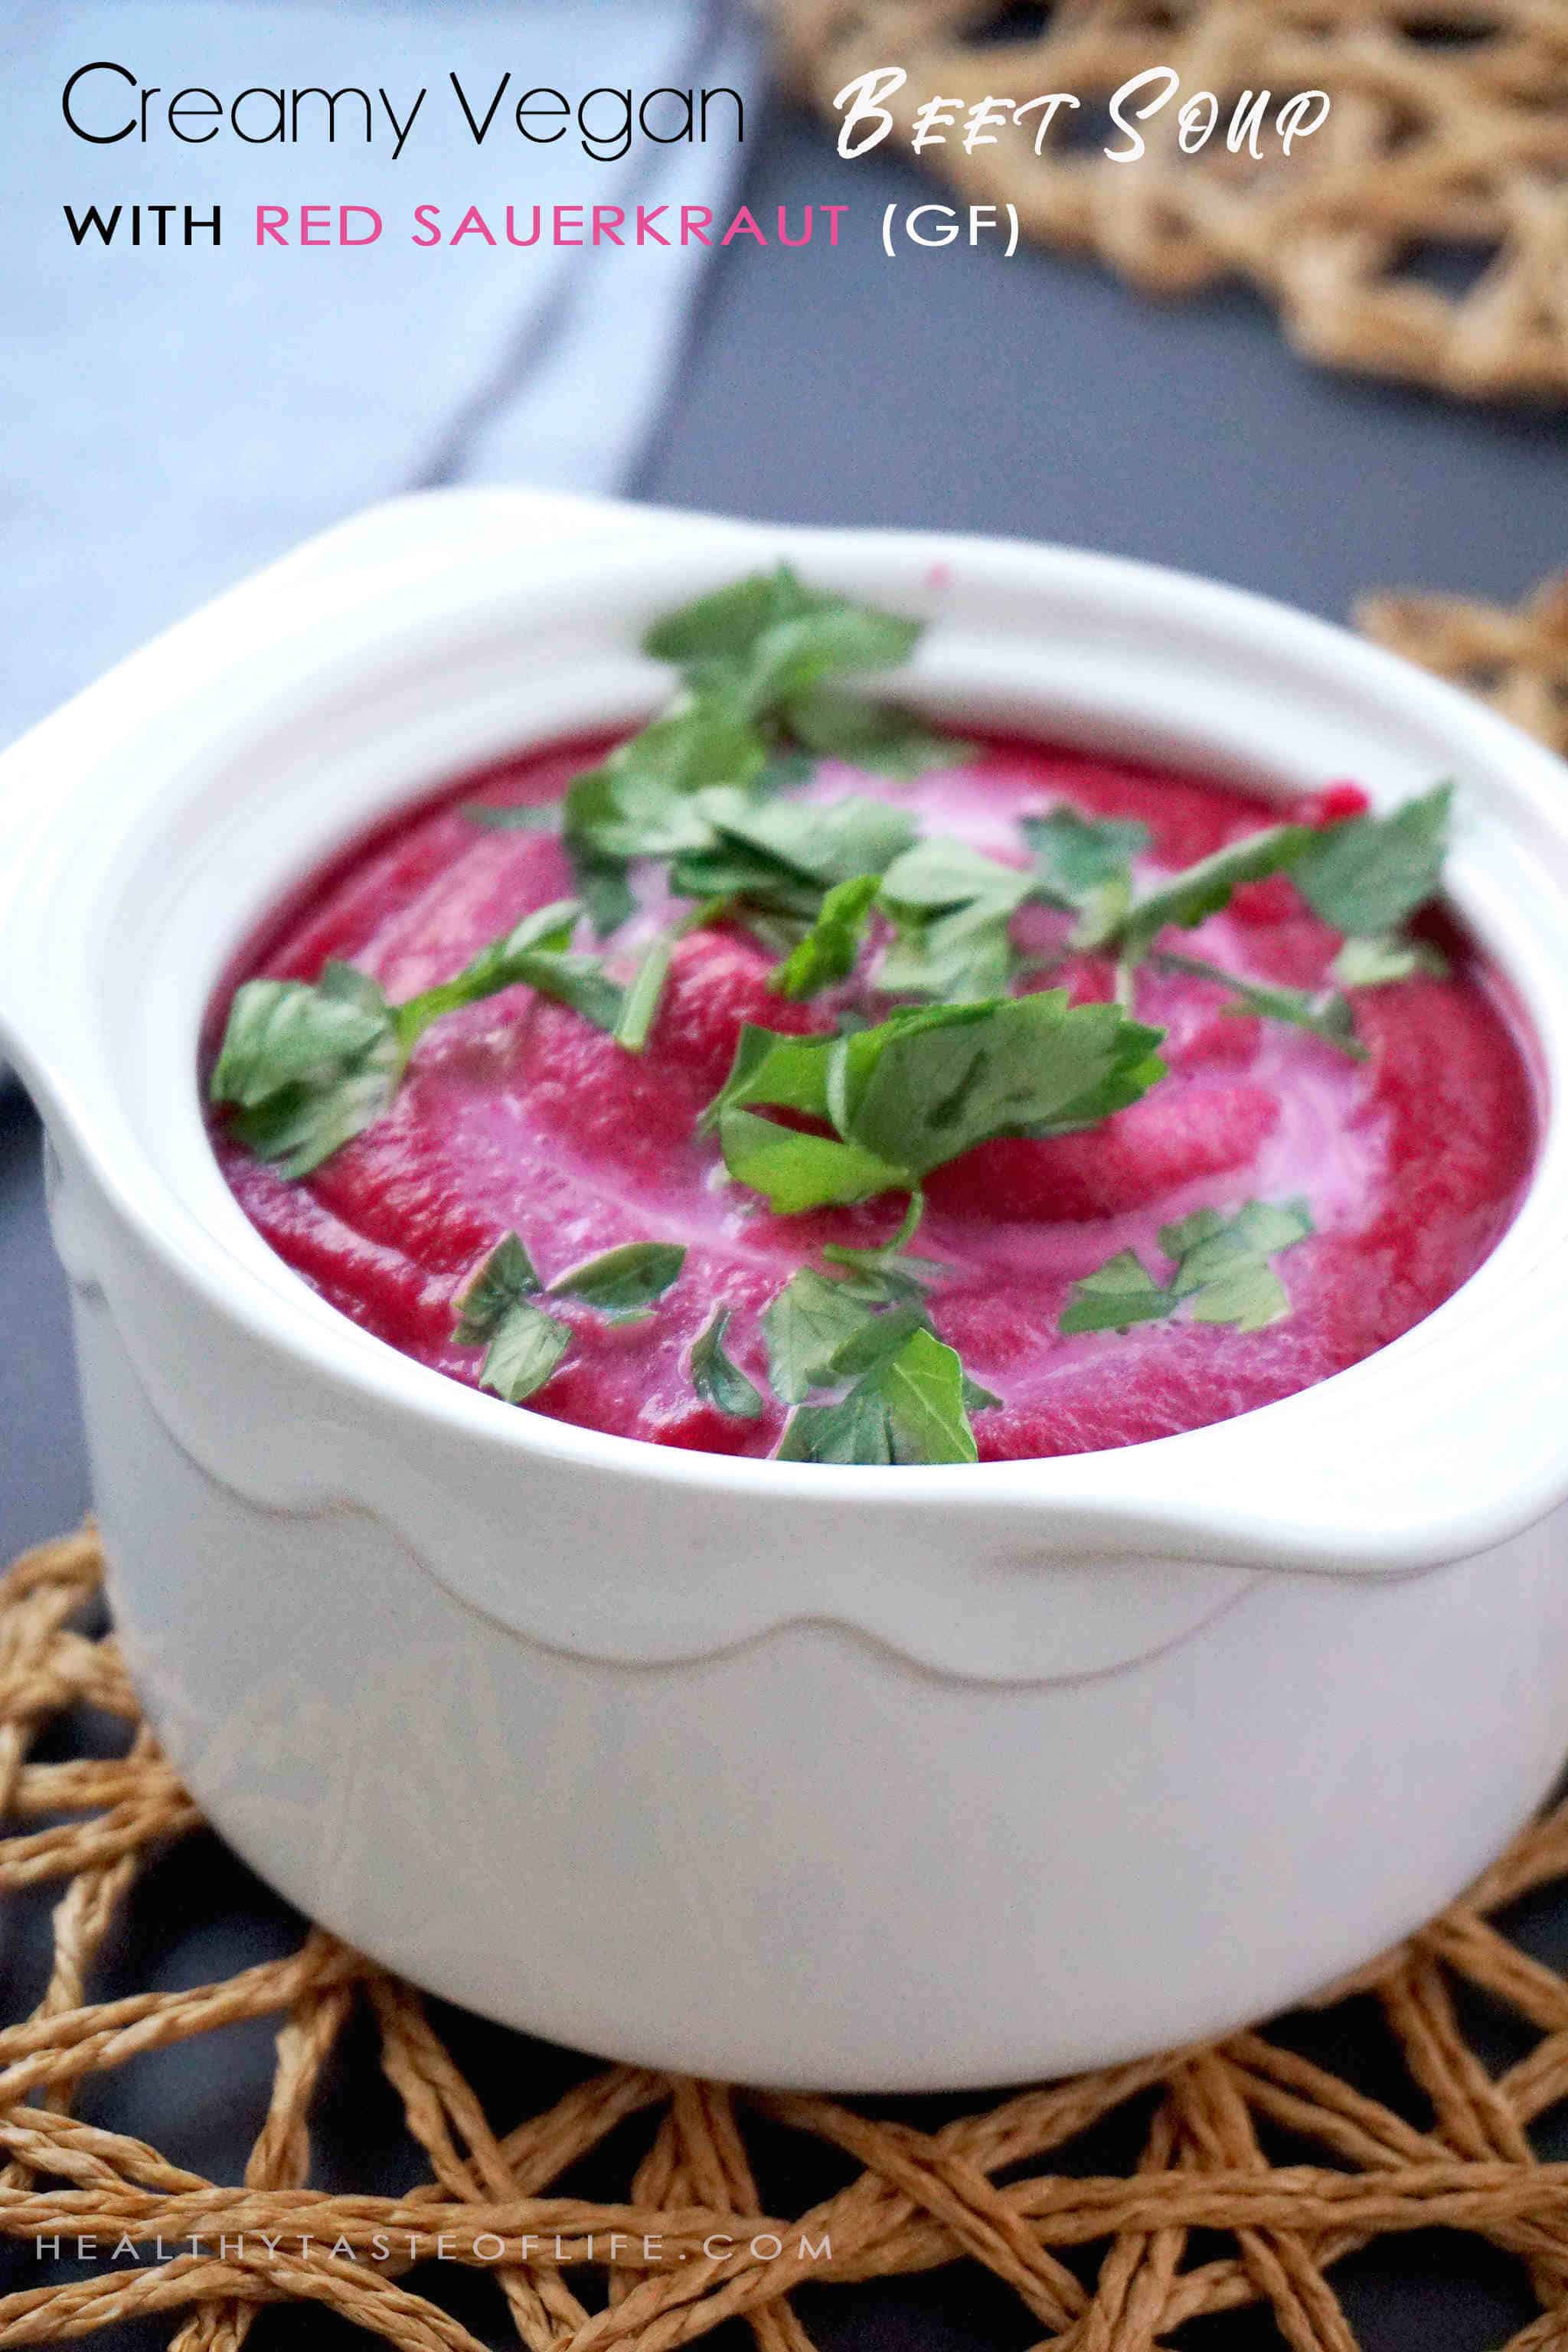 This delicious creamy beet soup recipe is a simple vegan version of traditional borscht made creamy in a blender. A healthy, gluten free soup with sweet-and-sour hues made with beets and red sauerkraut that make the flavor "pop”, perfect for cold weather!